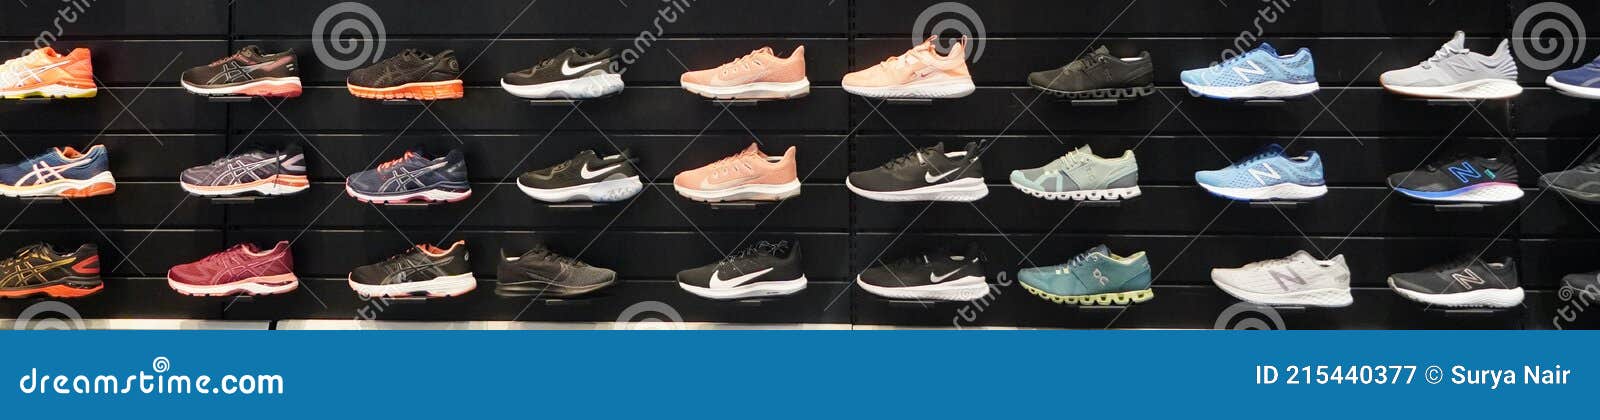 ven personal Comercio Shop Display of a Lot of Sports Shoes on a Wall. a View of a Wall of Shoes  Inside the Store Editorial Photography - Image of shoe, athletic: 215440377